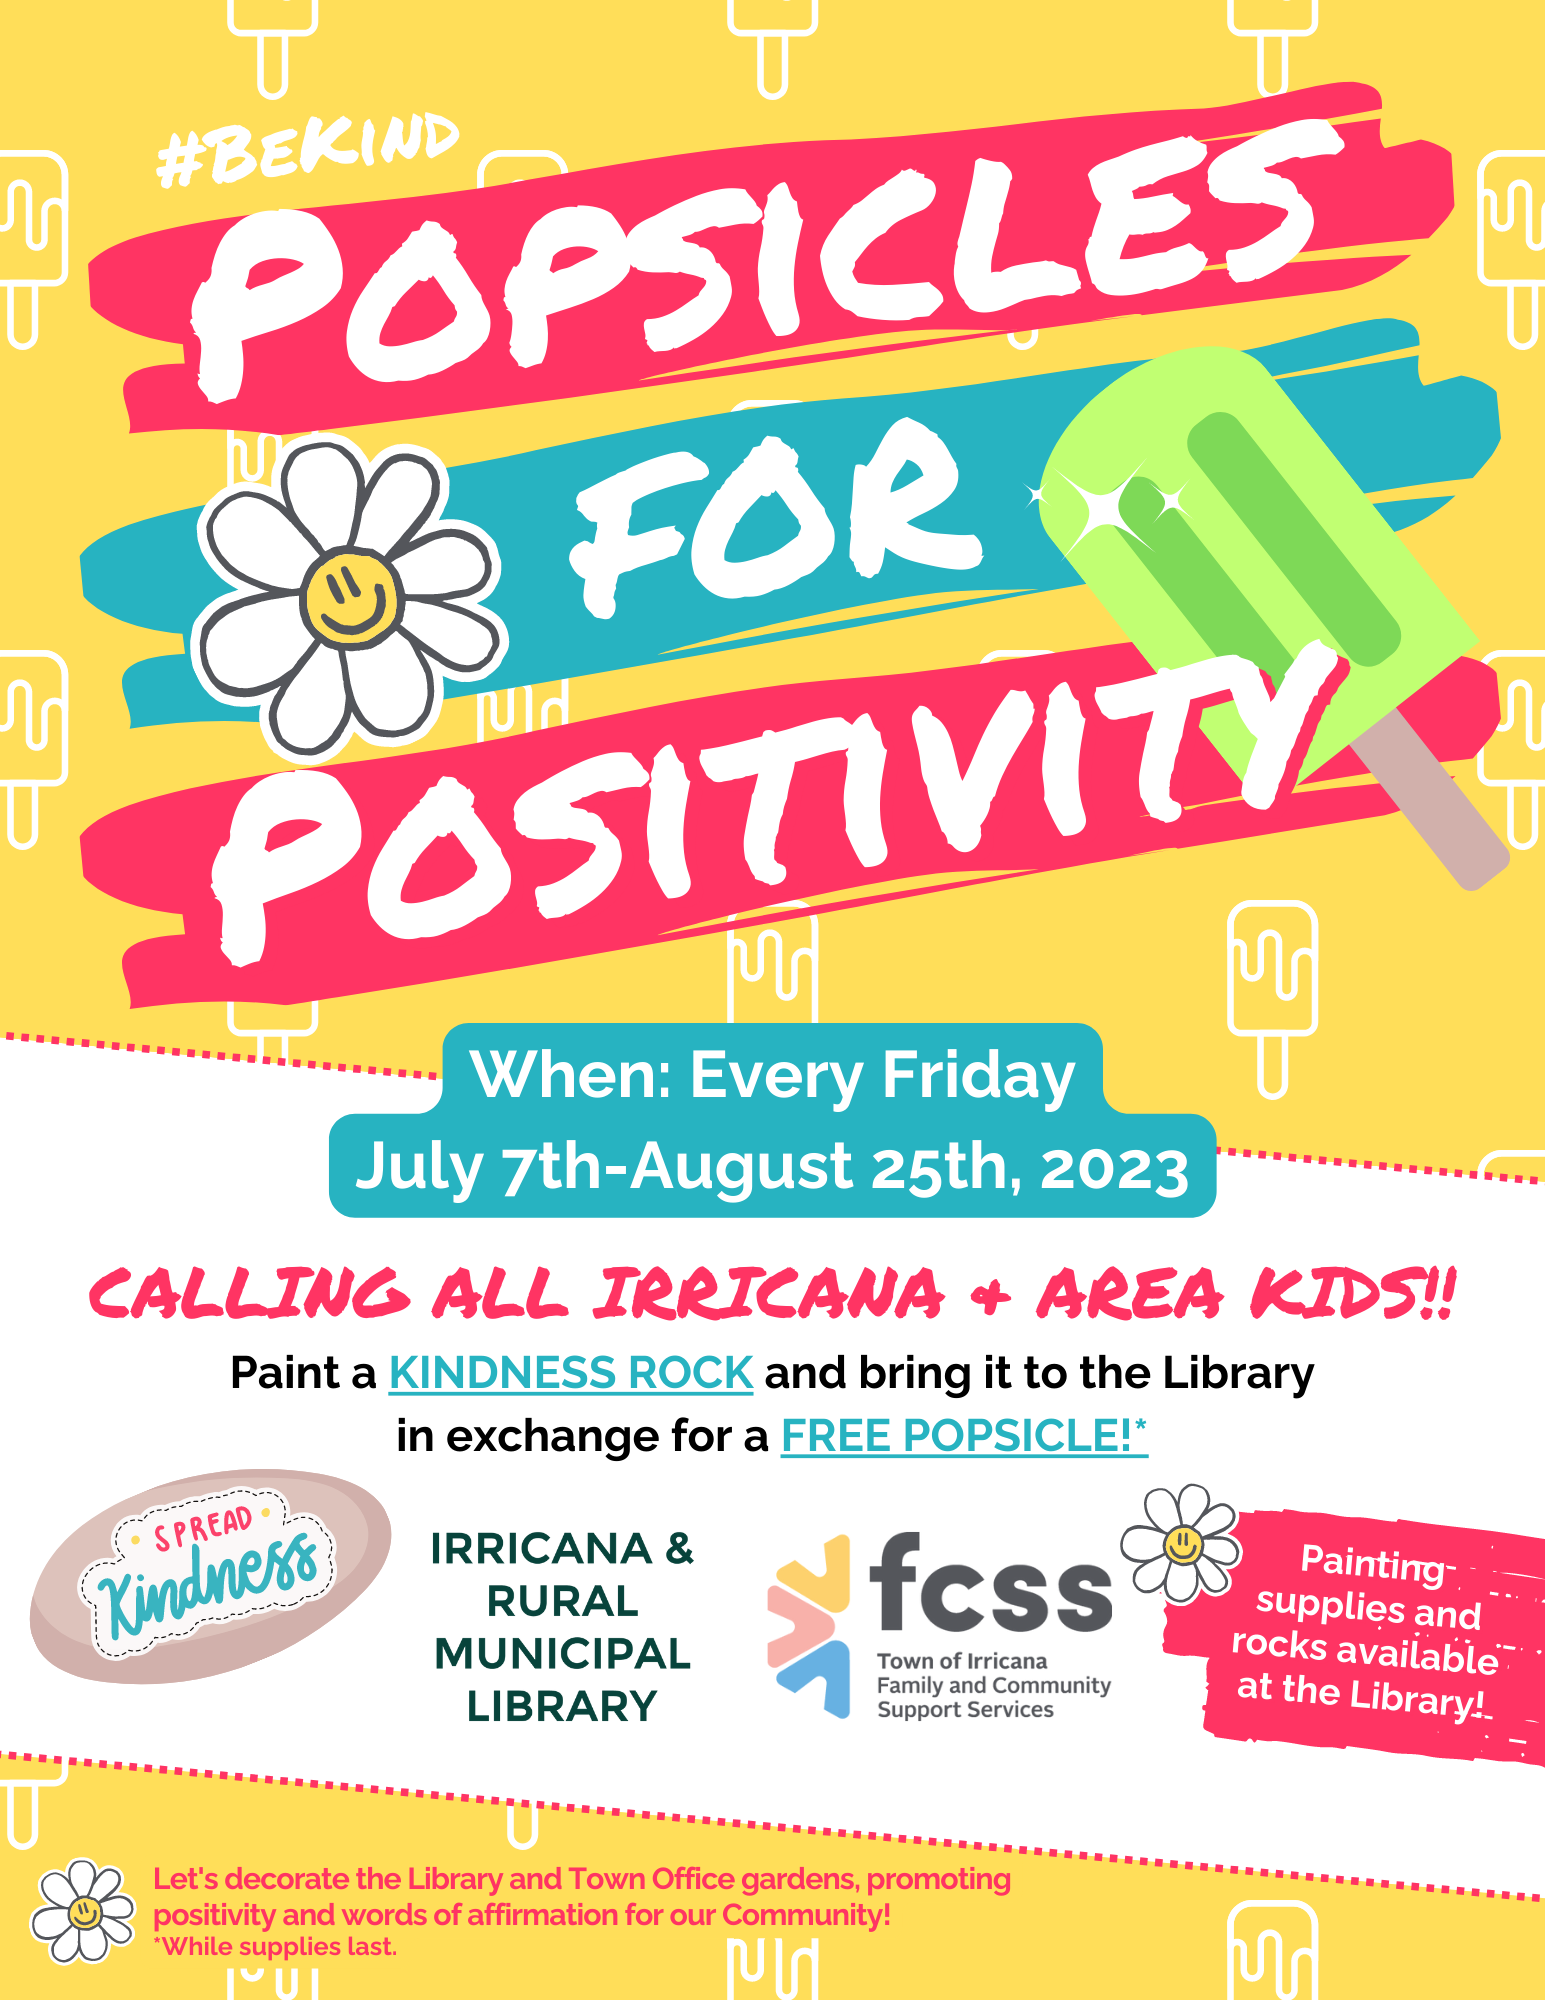 Irricana Popsicles for Positivity at the Irricana Library July 7-August 25, 2023